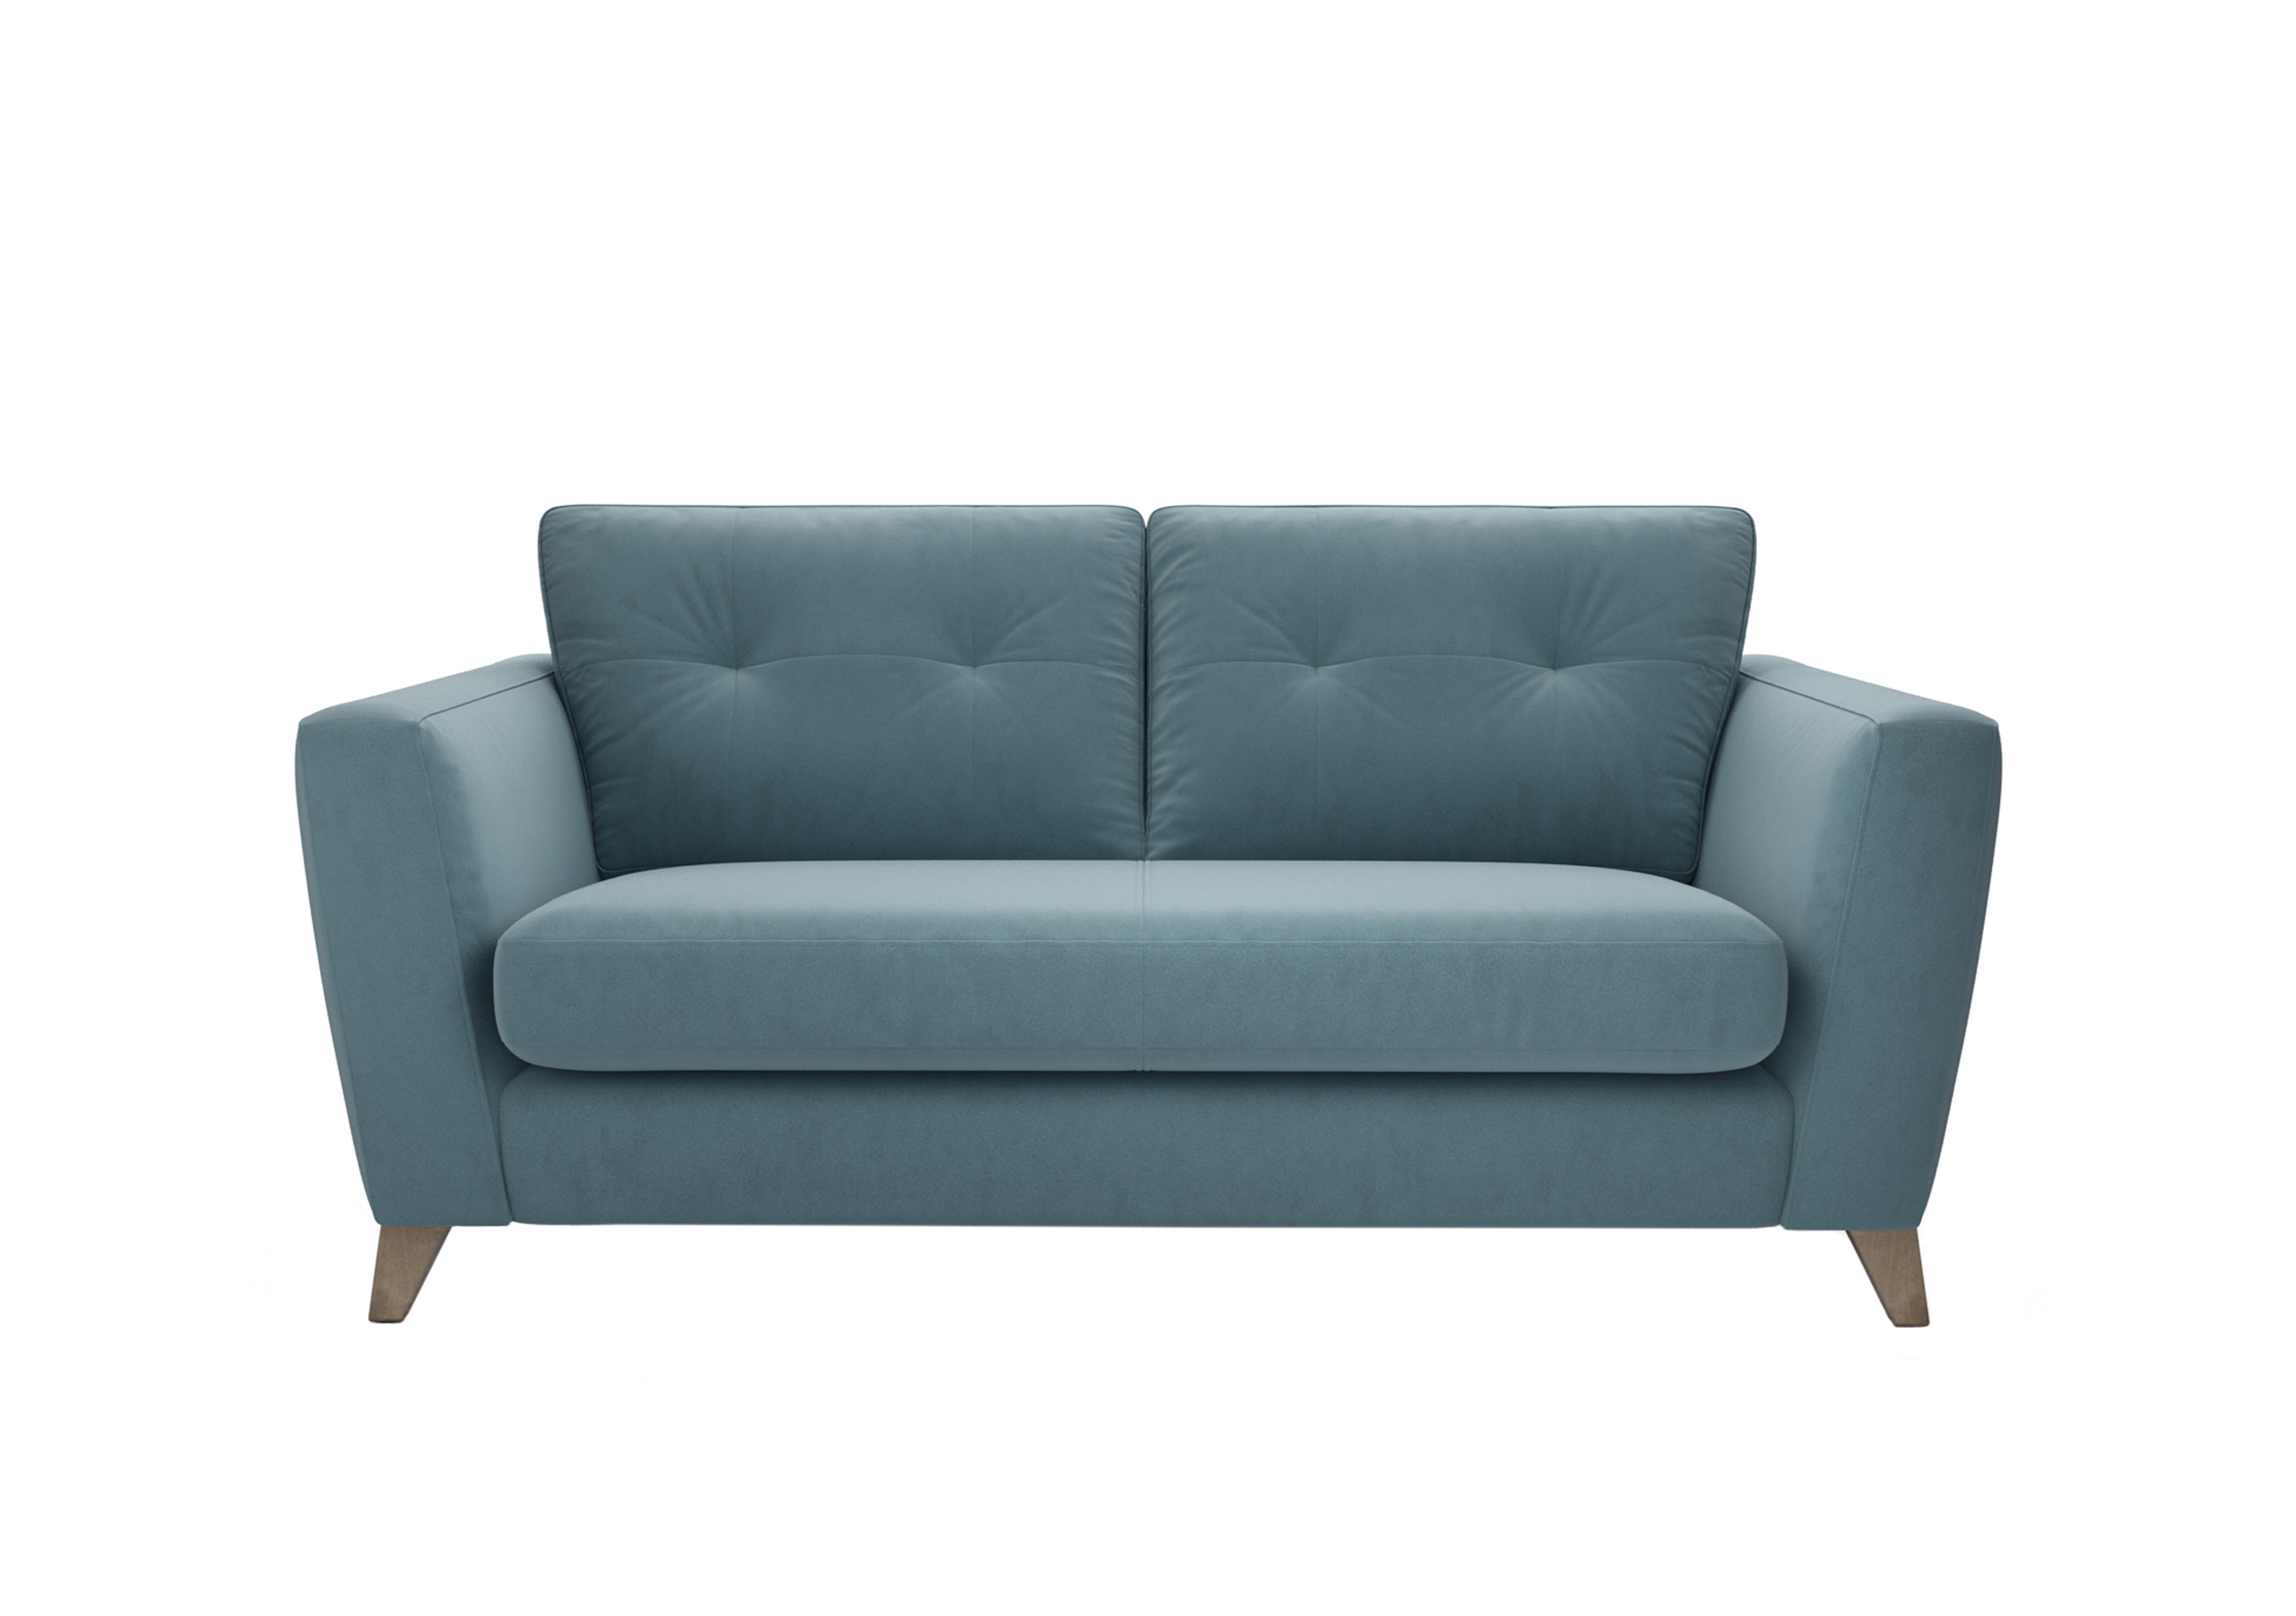 Hermione 2.5 Seater Fabric Sofa in Sha252 Shallow Puddle Wo Ft on Furniture Village